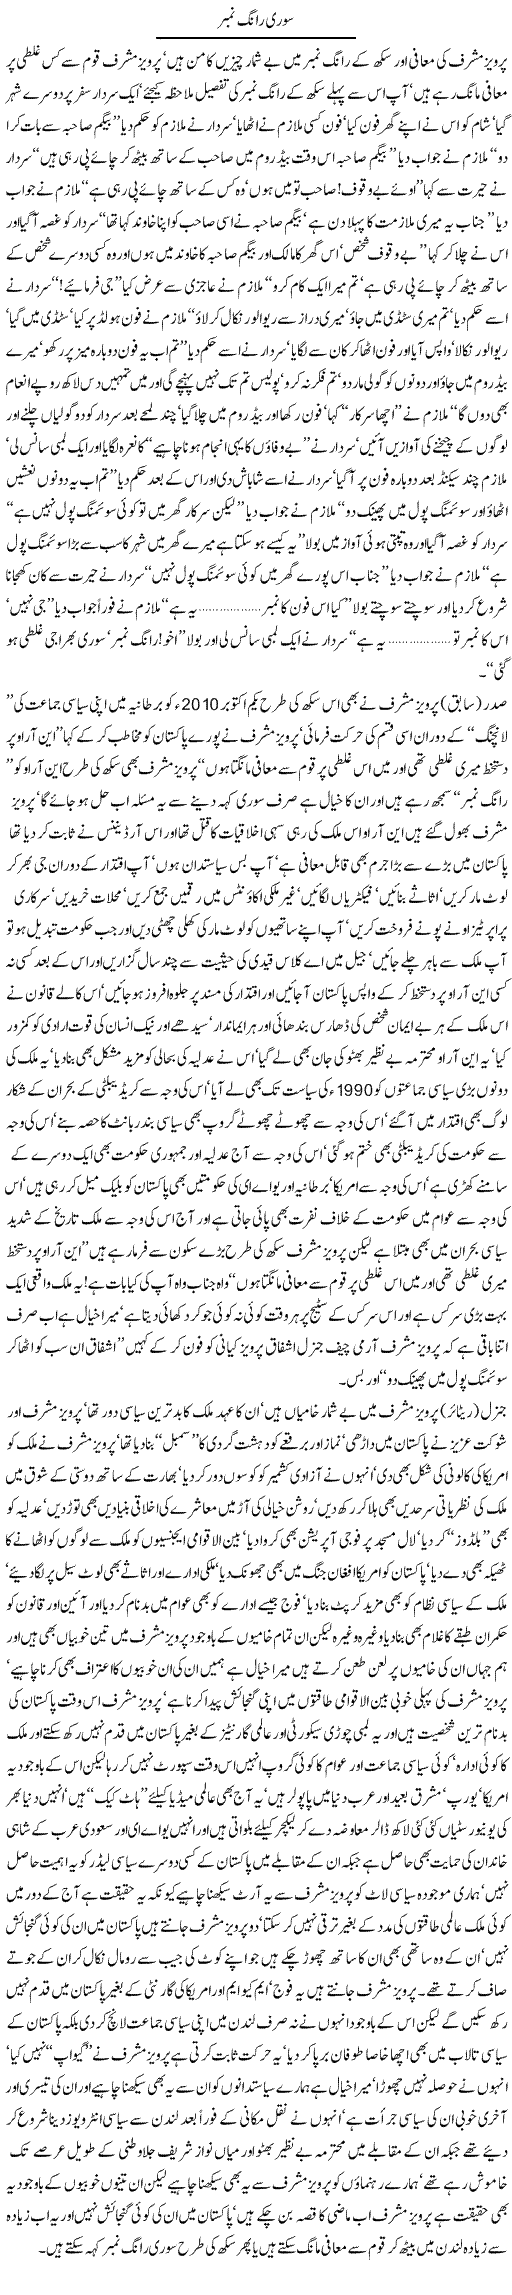 Wrong Number Express Column Javed Chaudhry 5 October 2010